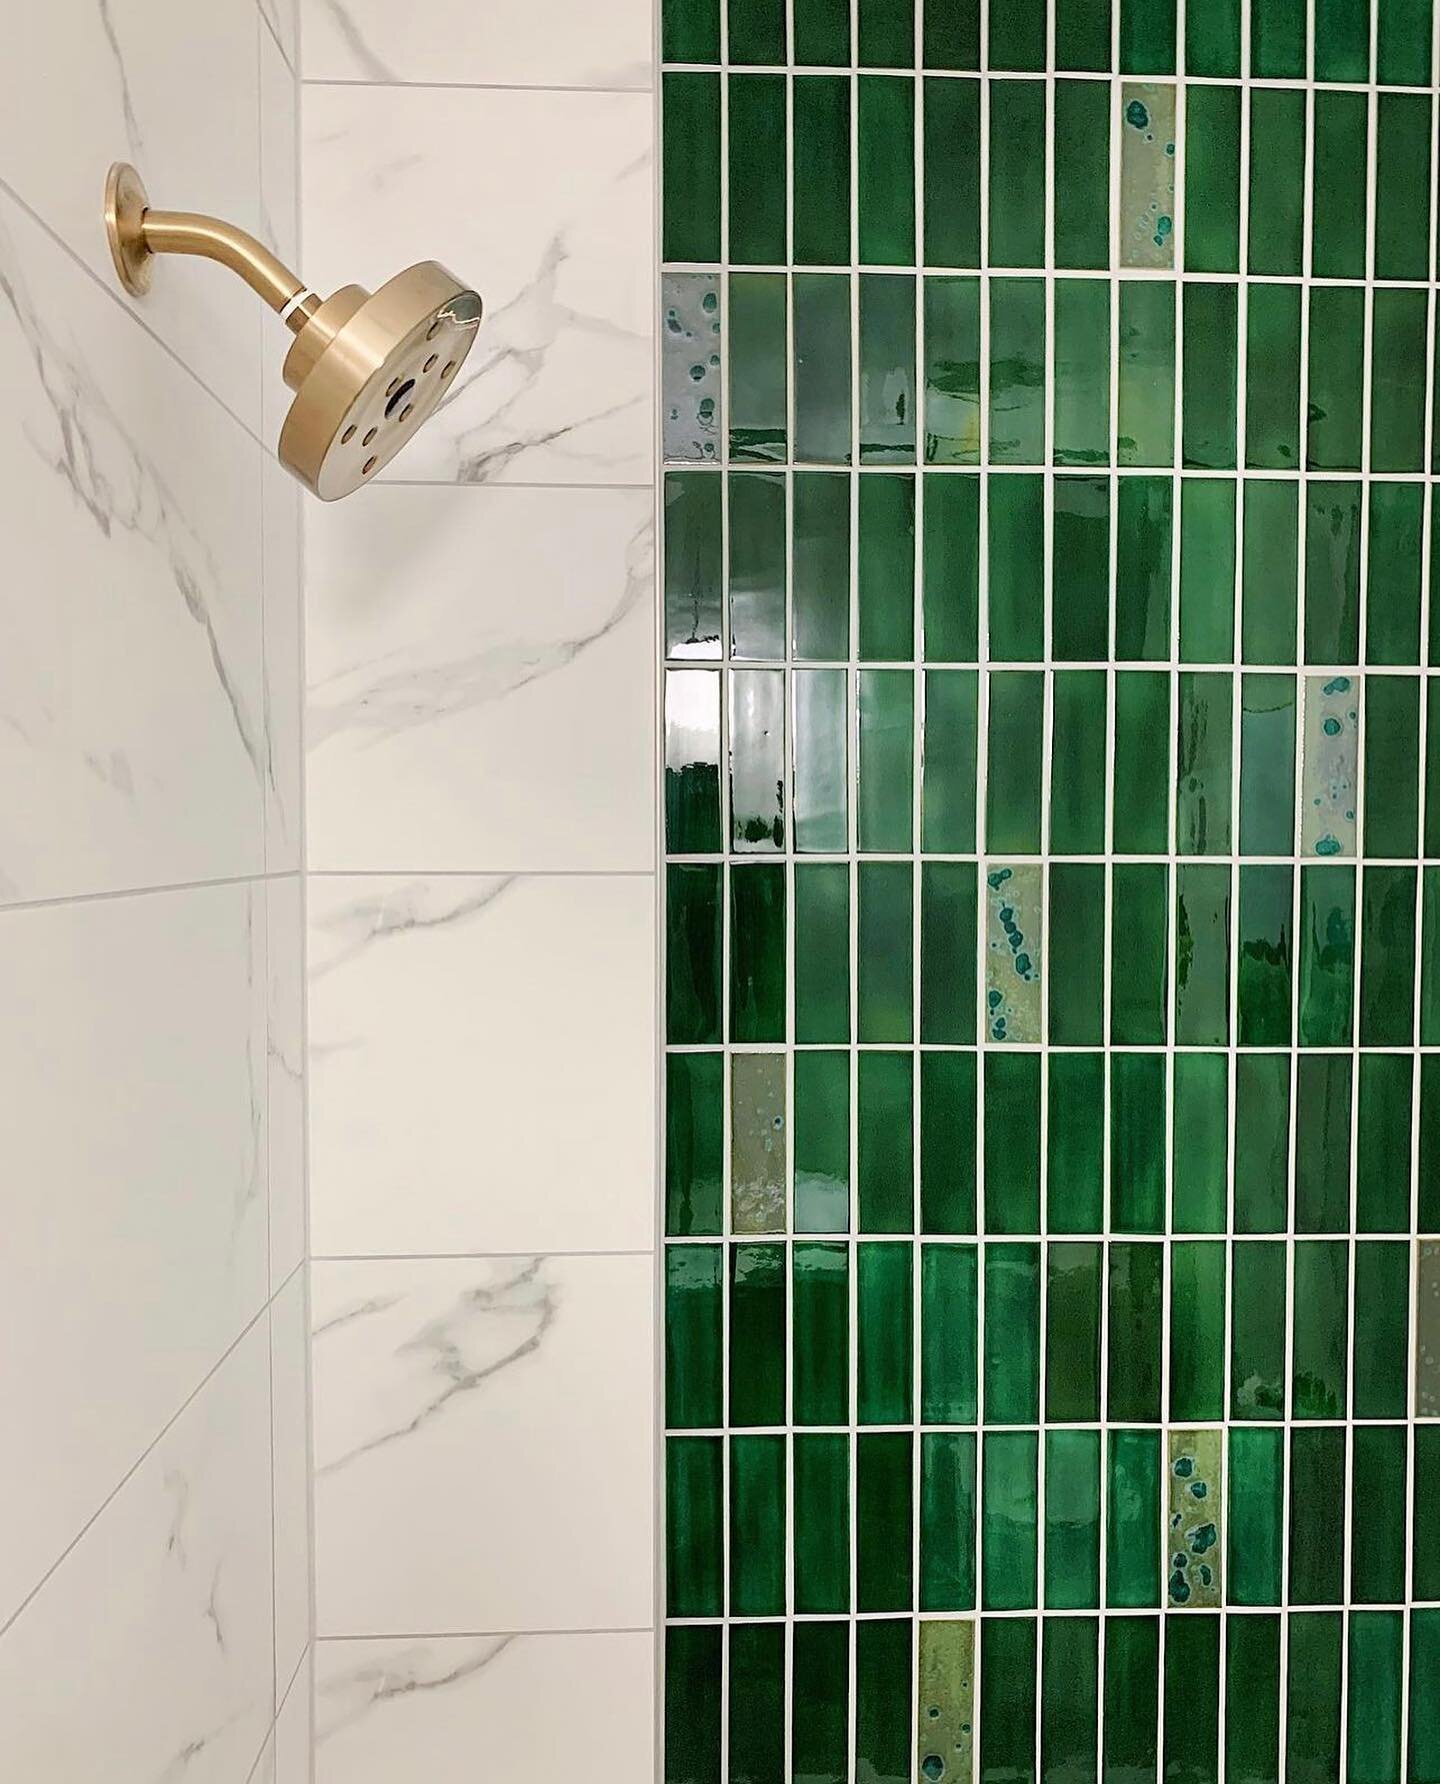 Consider this proof that you don't have to be scared of dark tile in a windowless bathroom, as long it's done right! 🙌🏼

Since there was no natural light in this bathroom, we knew that keeping some of the shower tile white would help with the overa